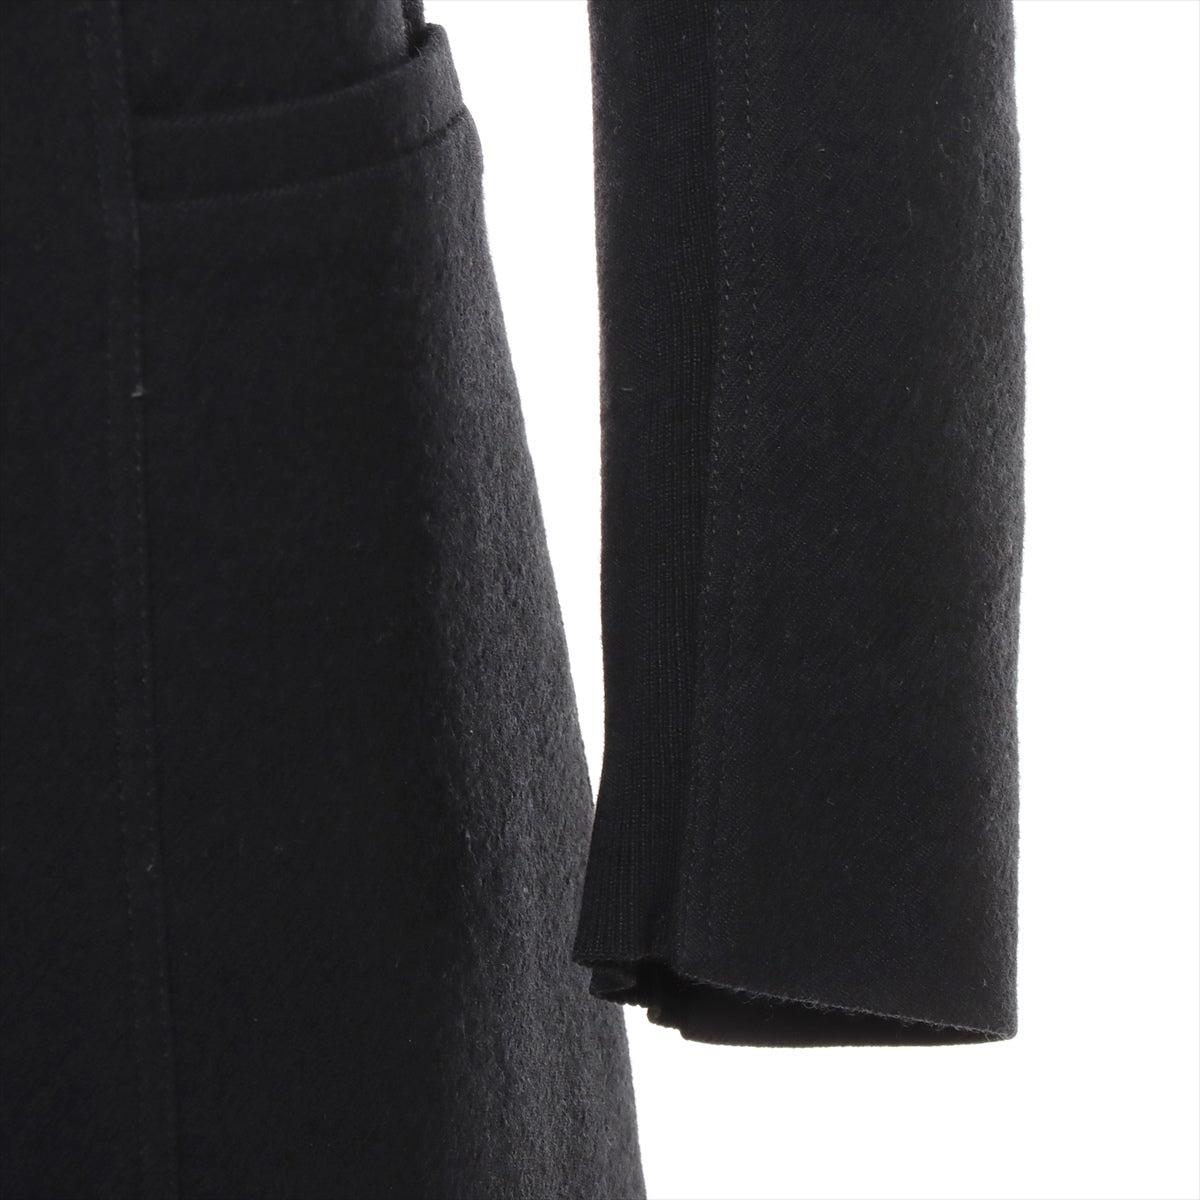 Rick Owens 16AW Wool coats I42 Black  RP16F2934 tube way coat Hem lining There are threads on cuffs etc.